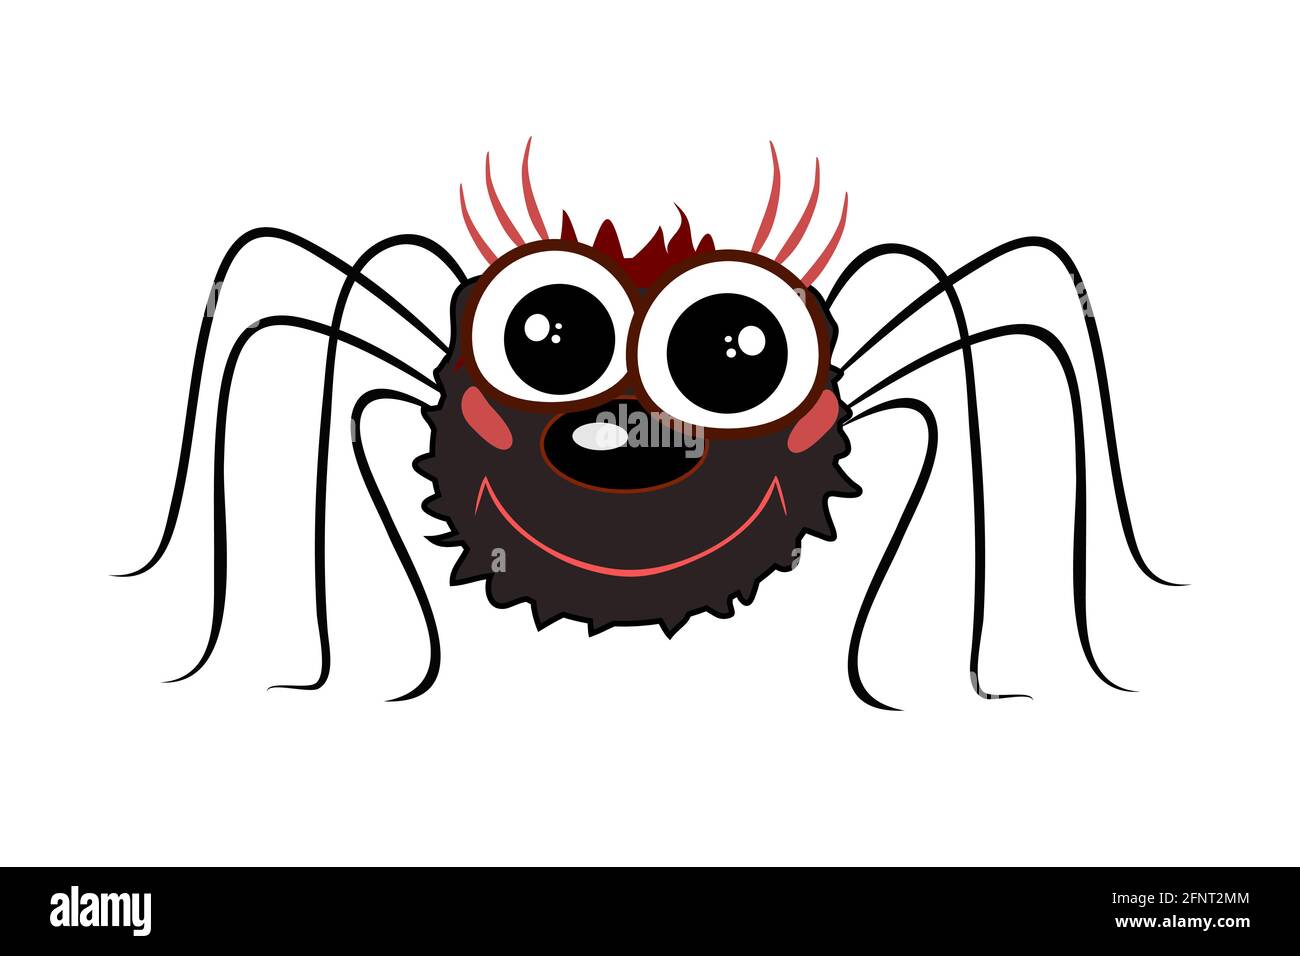 Funny cartoon spider isolated on white background. Cute black spider, traditional Halloween symbol. Lovely little creature. Stock vector illustration Stock Vector